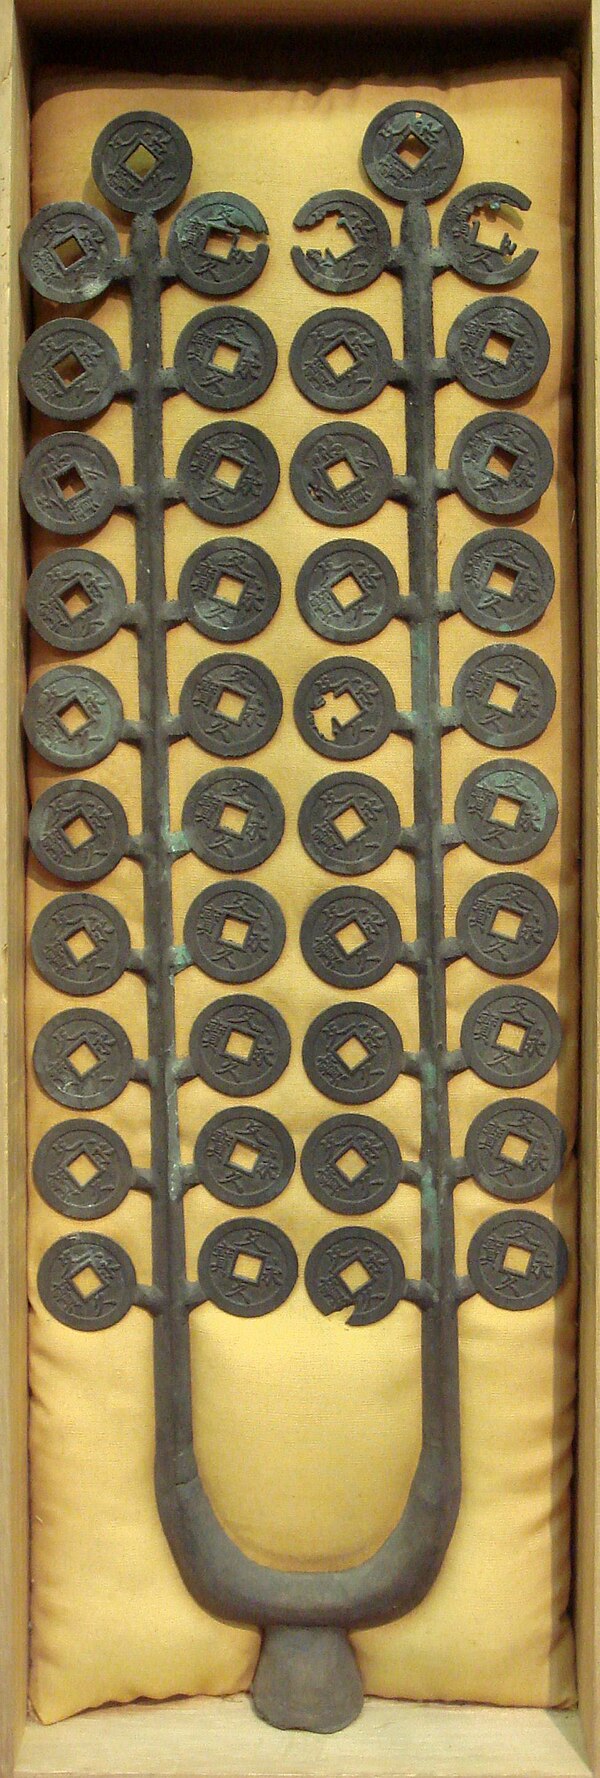 Bunkyū ēhō (文久永宝). Branched ("Edasen" 枝銭) Mon coins of the Bunkyū period. This shows the foundry technique to make the coins: the coins would then be 